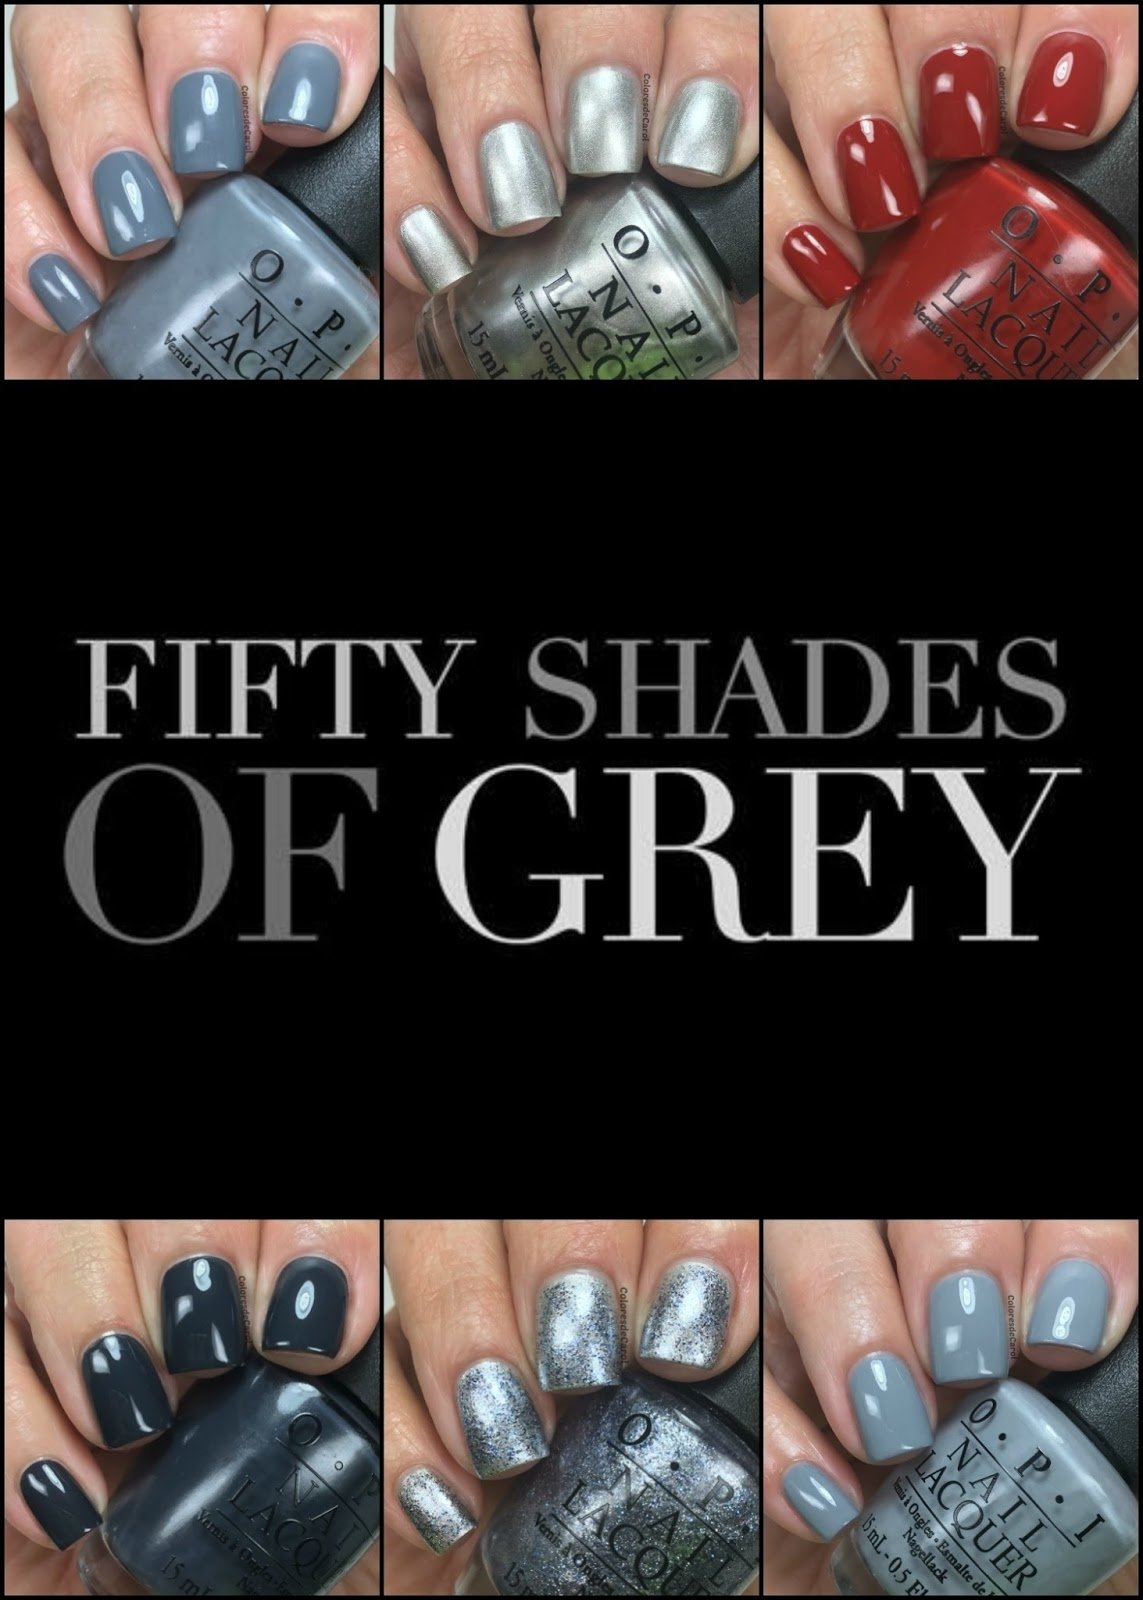 10 Elegant 50 Shades Of Grey Ideas For Couples colores de carol opi 50 shades of grey swatches review and giveaway 2022